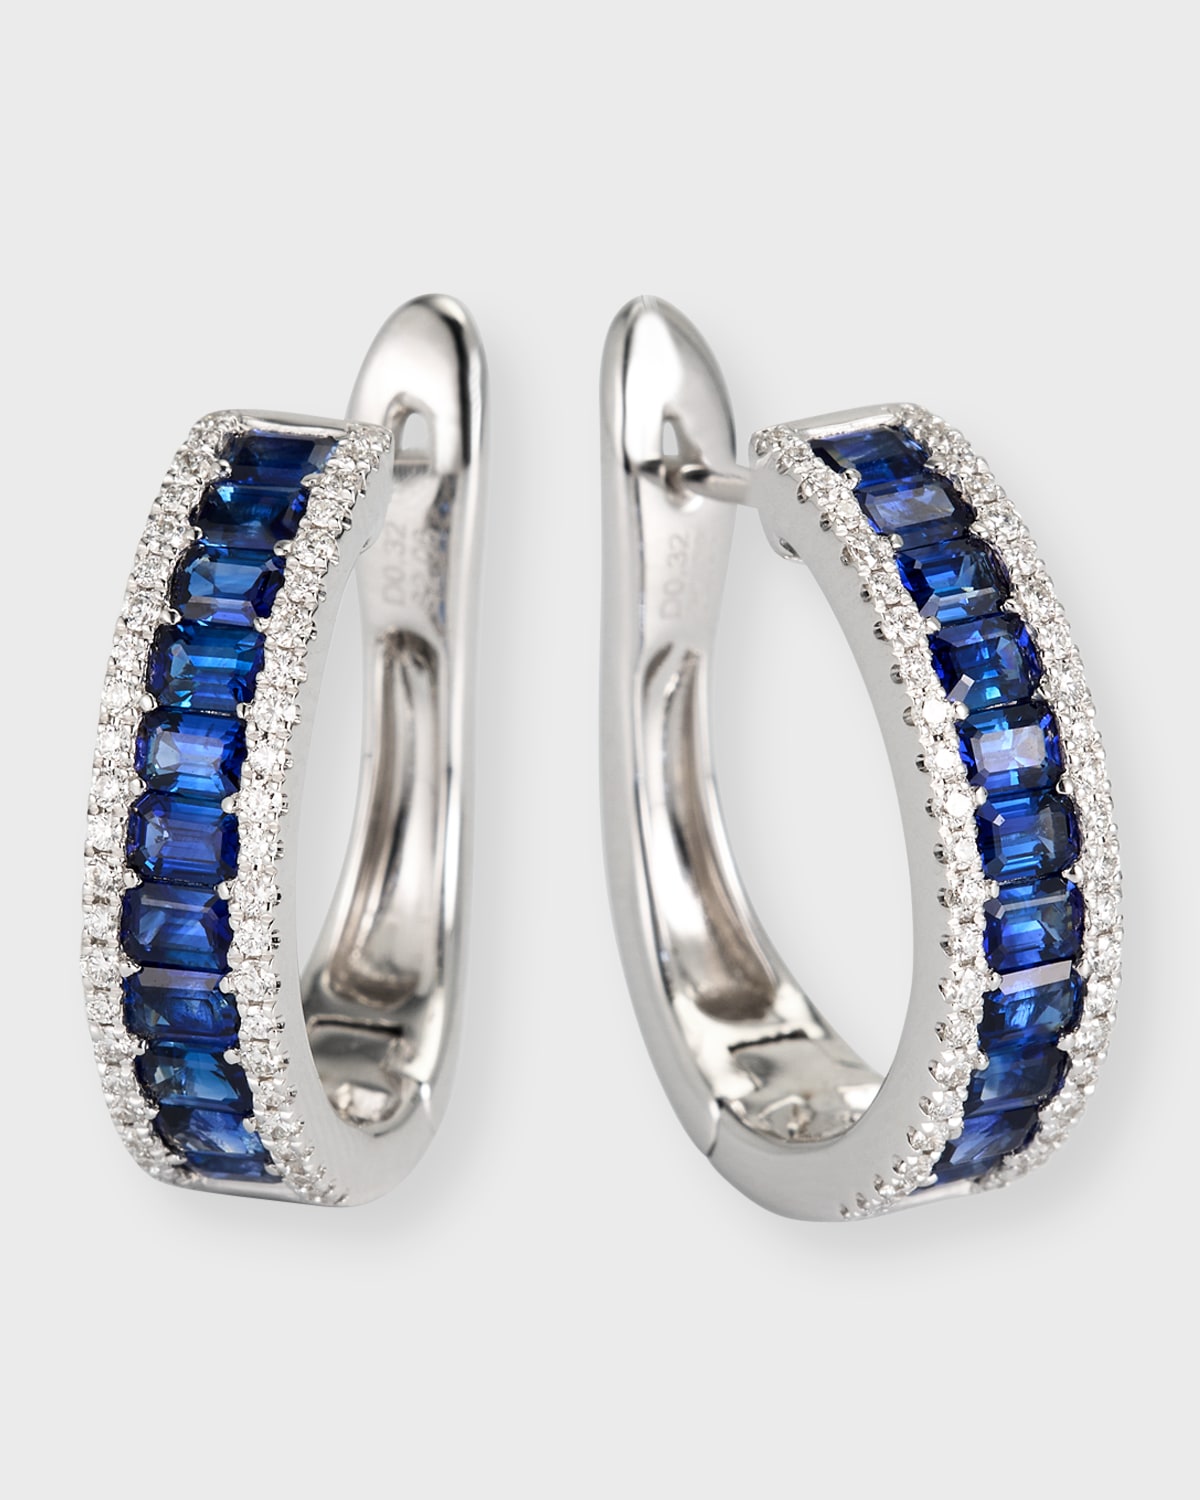 18K White Gold Earrings with Blue Sapphires and Diamonds